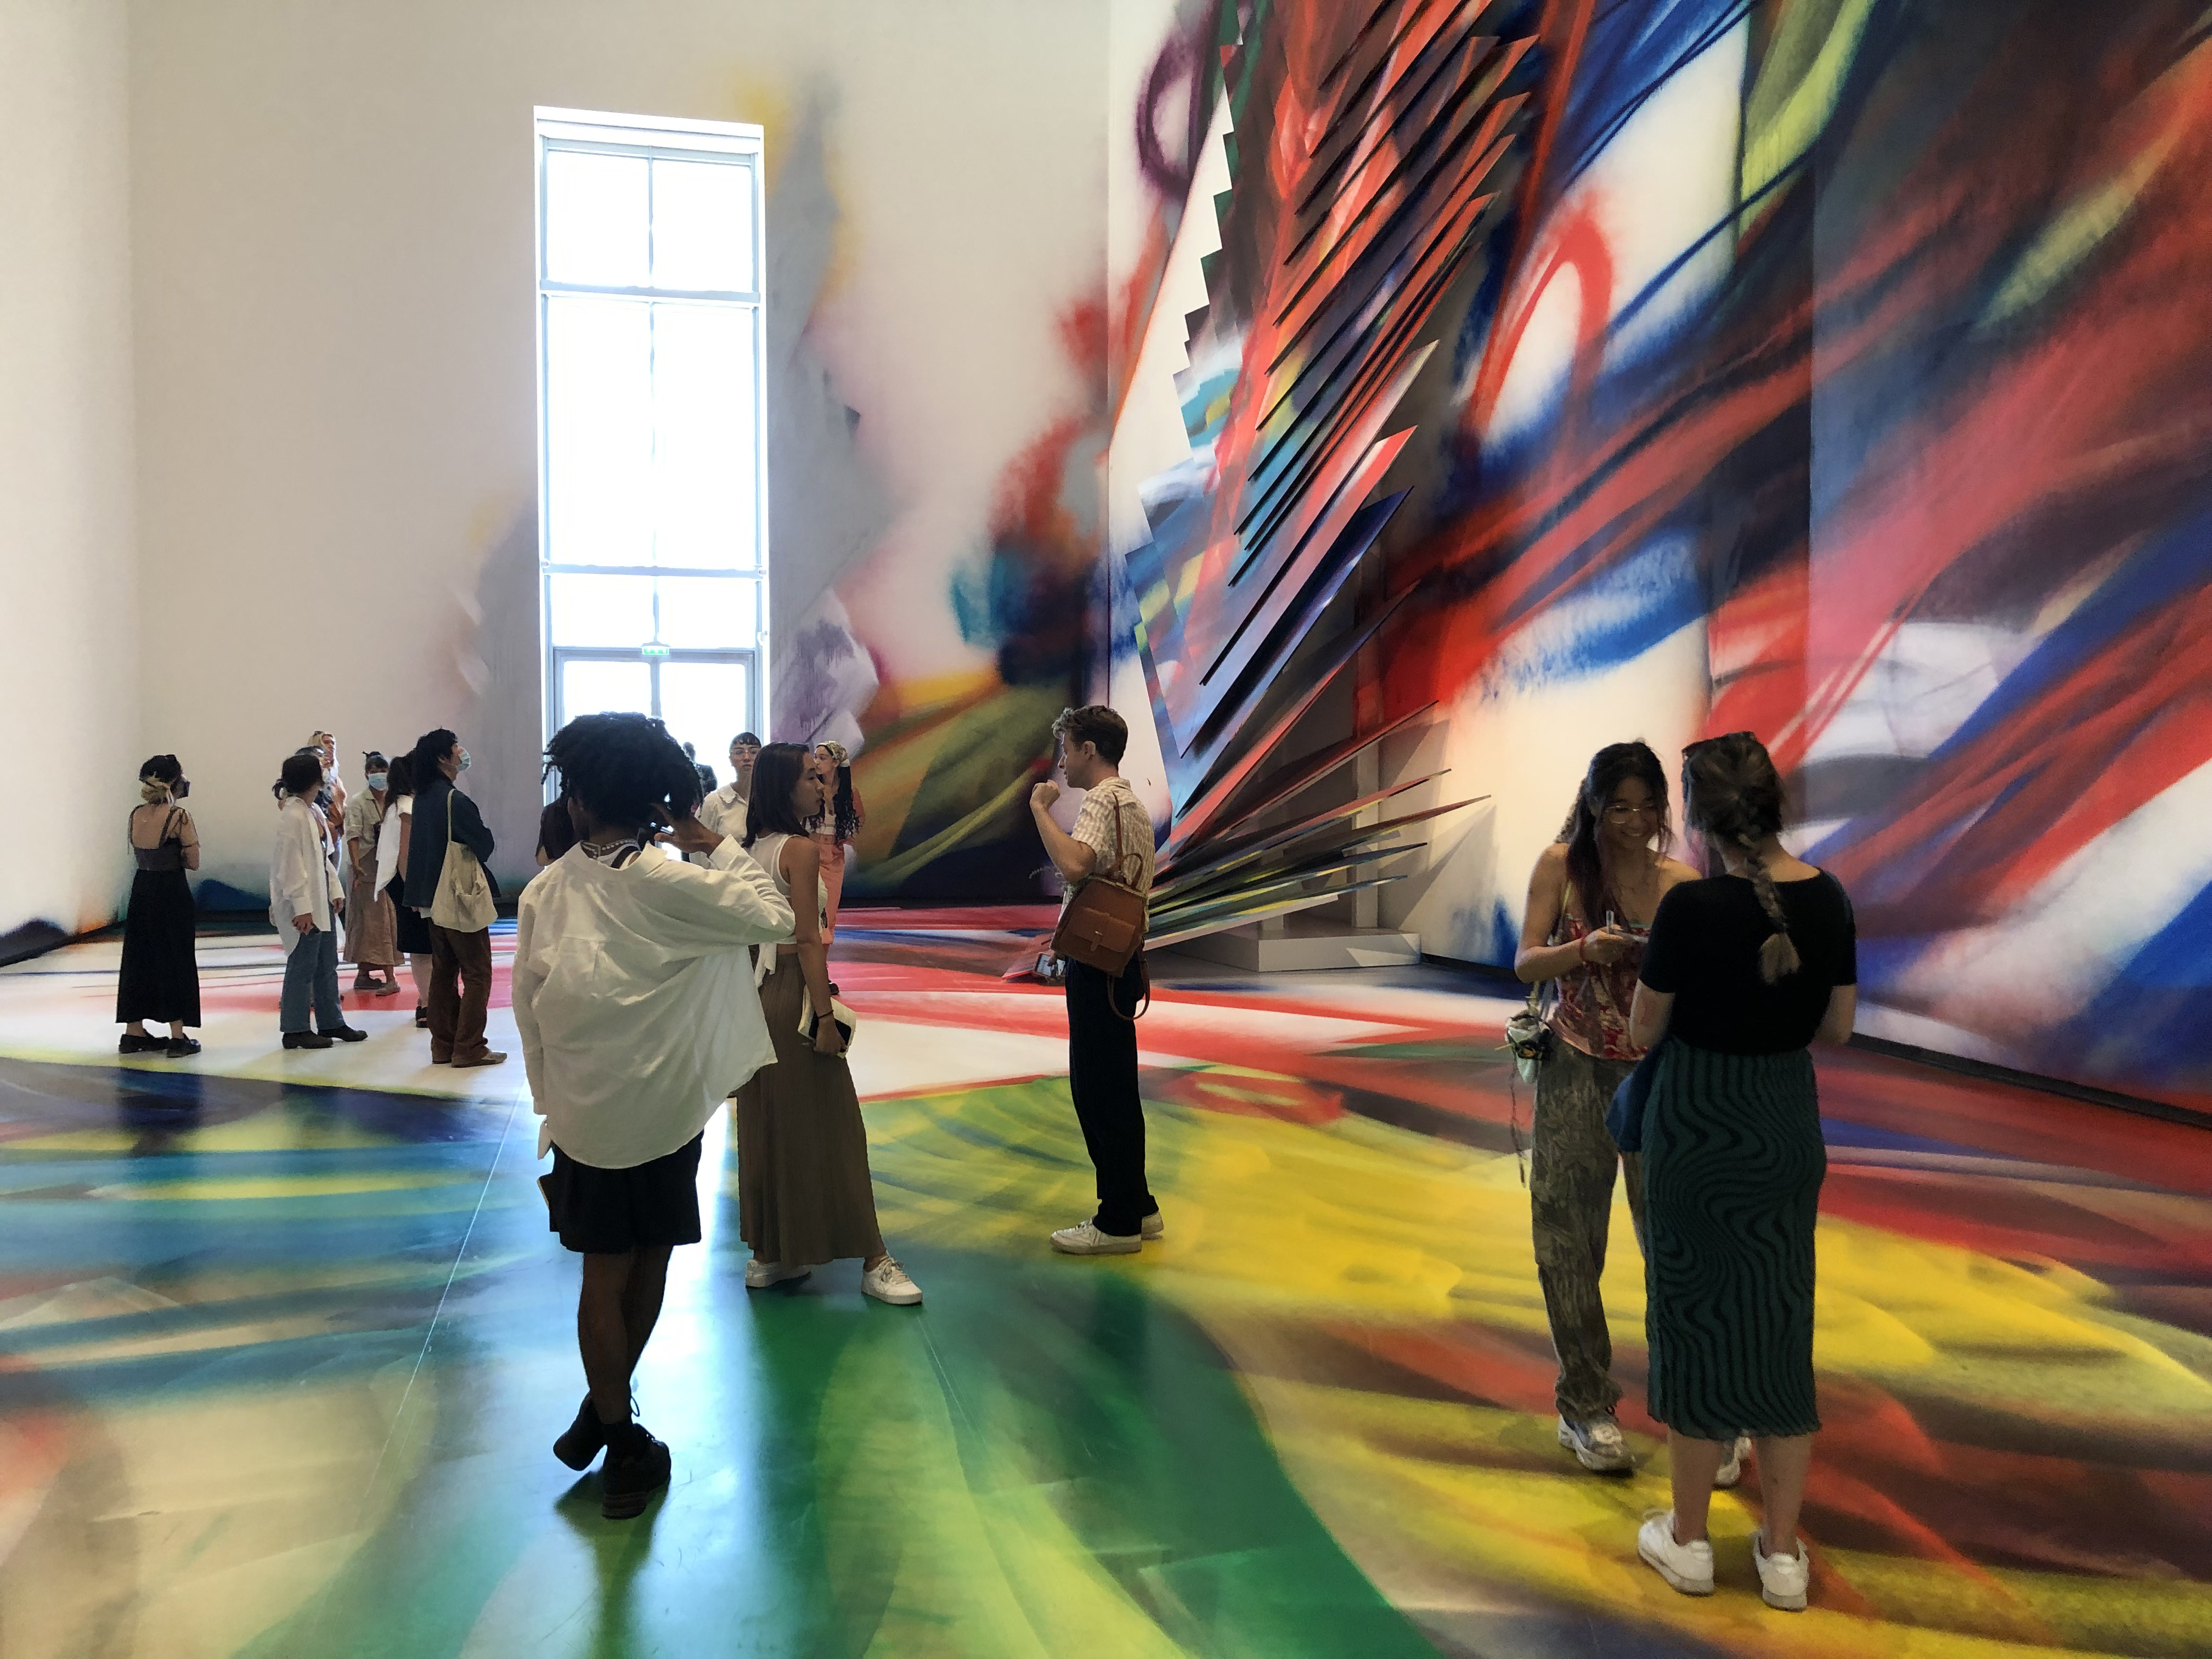 students gather inside an extremely colorful gallery space